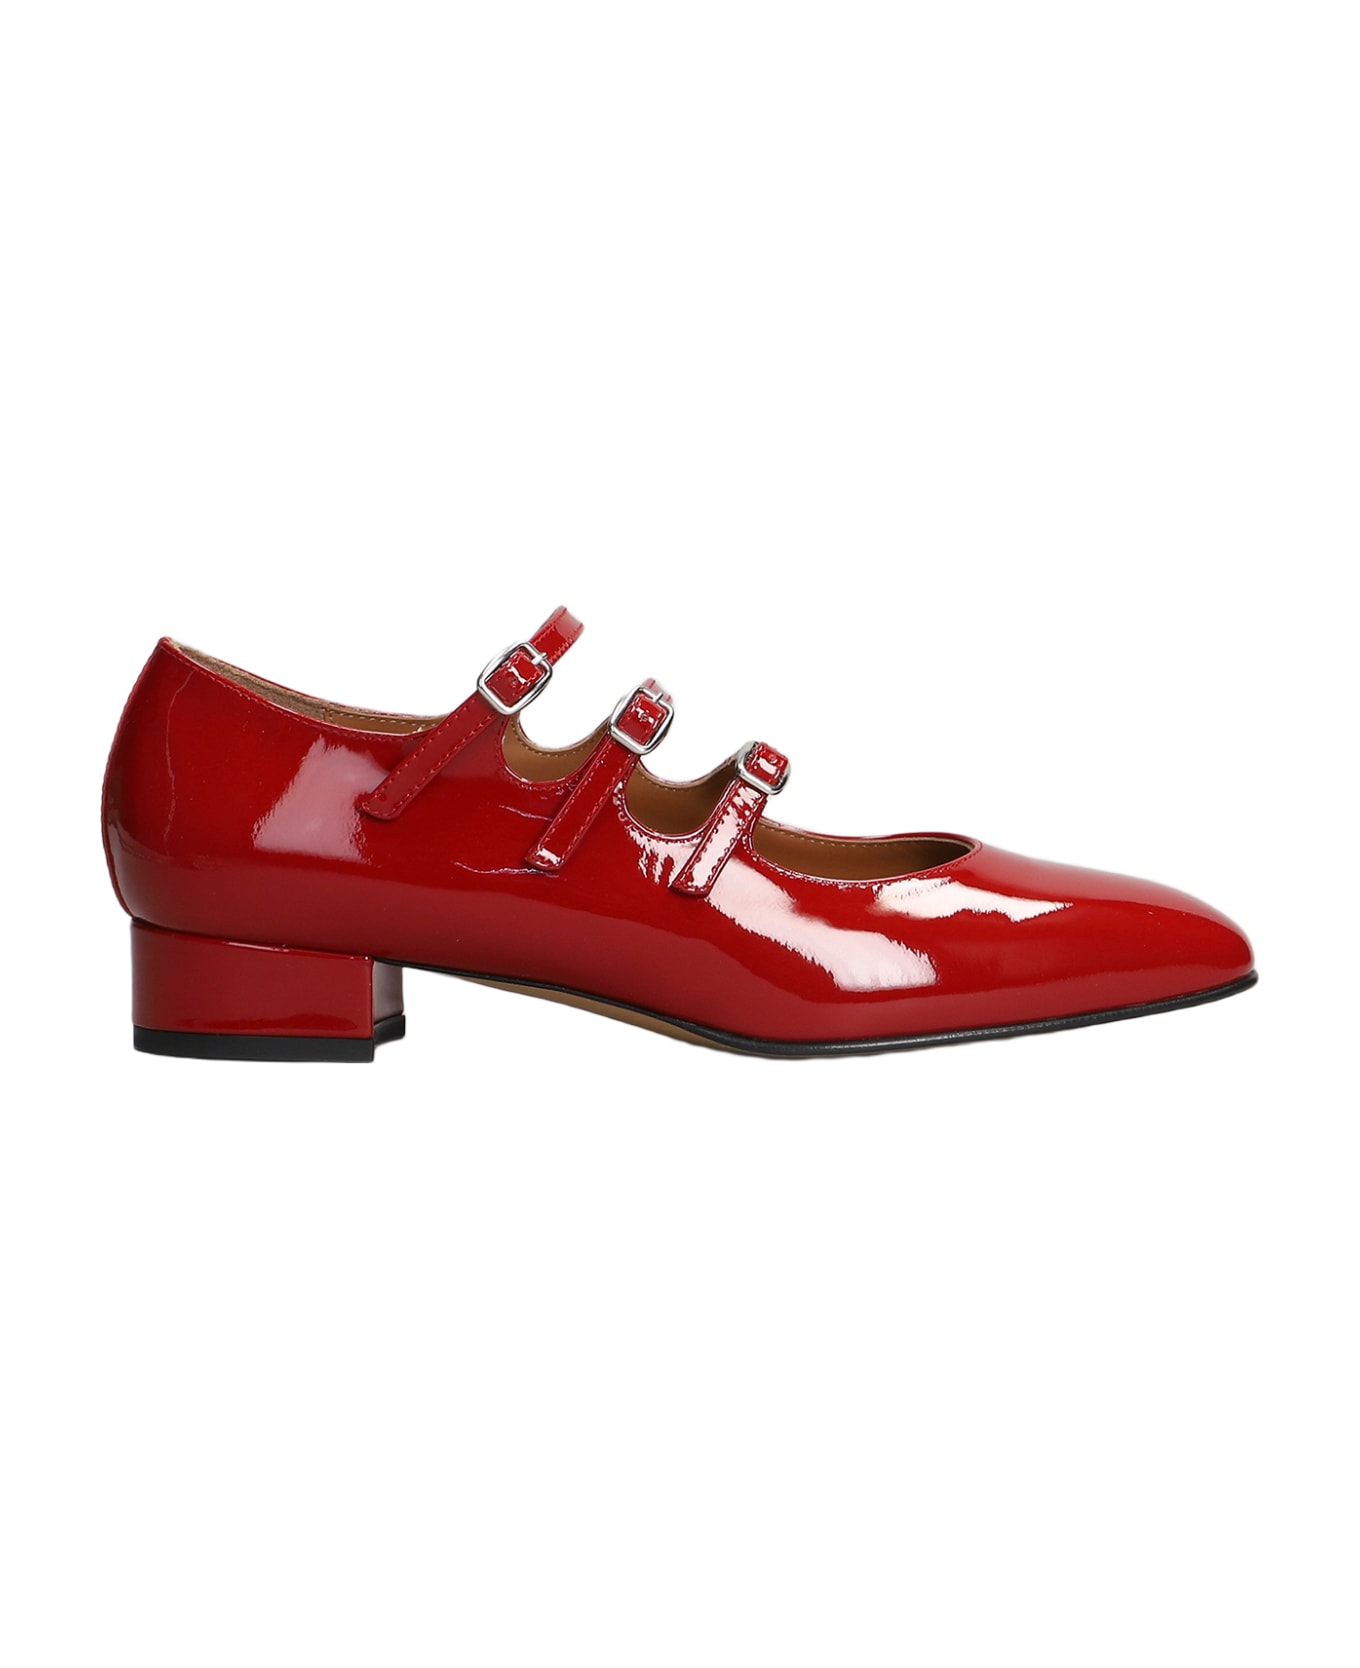 Carel Ariana Ballet Flats In Red Patent Leather - red